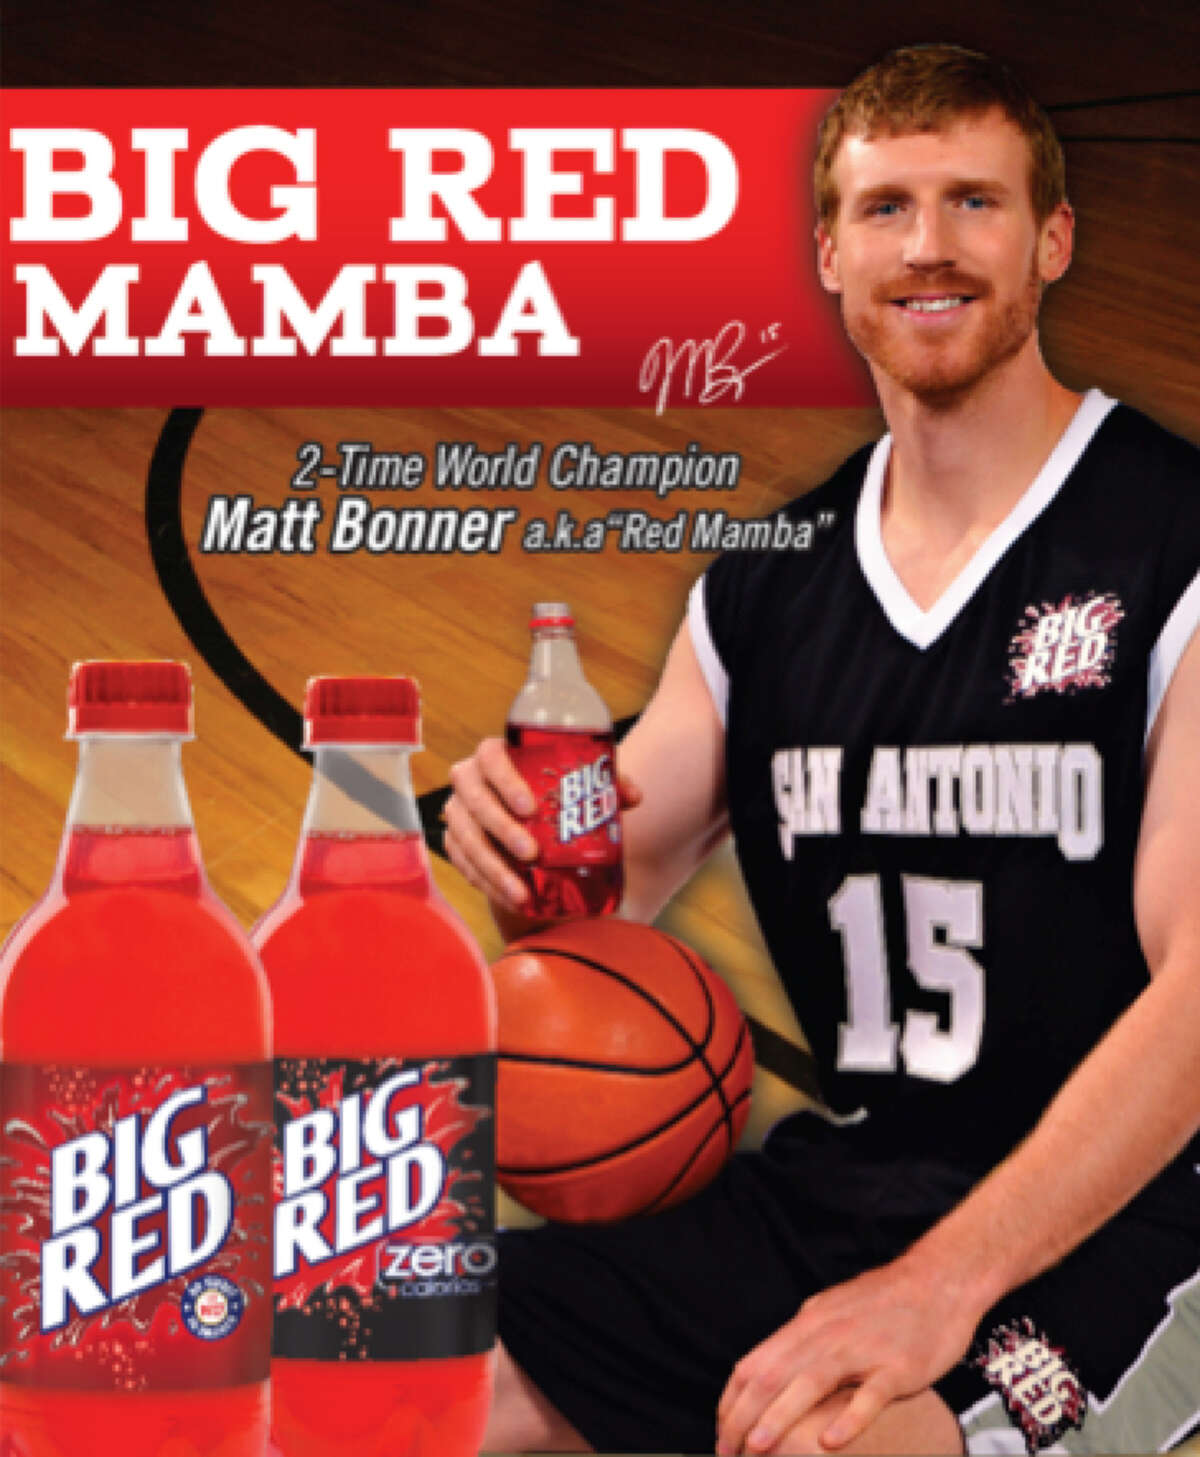 The Spurs' Matter Bonner has signed on to be a brand ambassador for San Antonio's favorite flavored soda, Big Red. But why stop there? Click through the slideshow for 11 more red products we'd like to see the "Red Mamba" endorse.